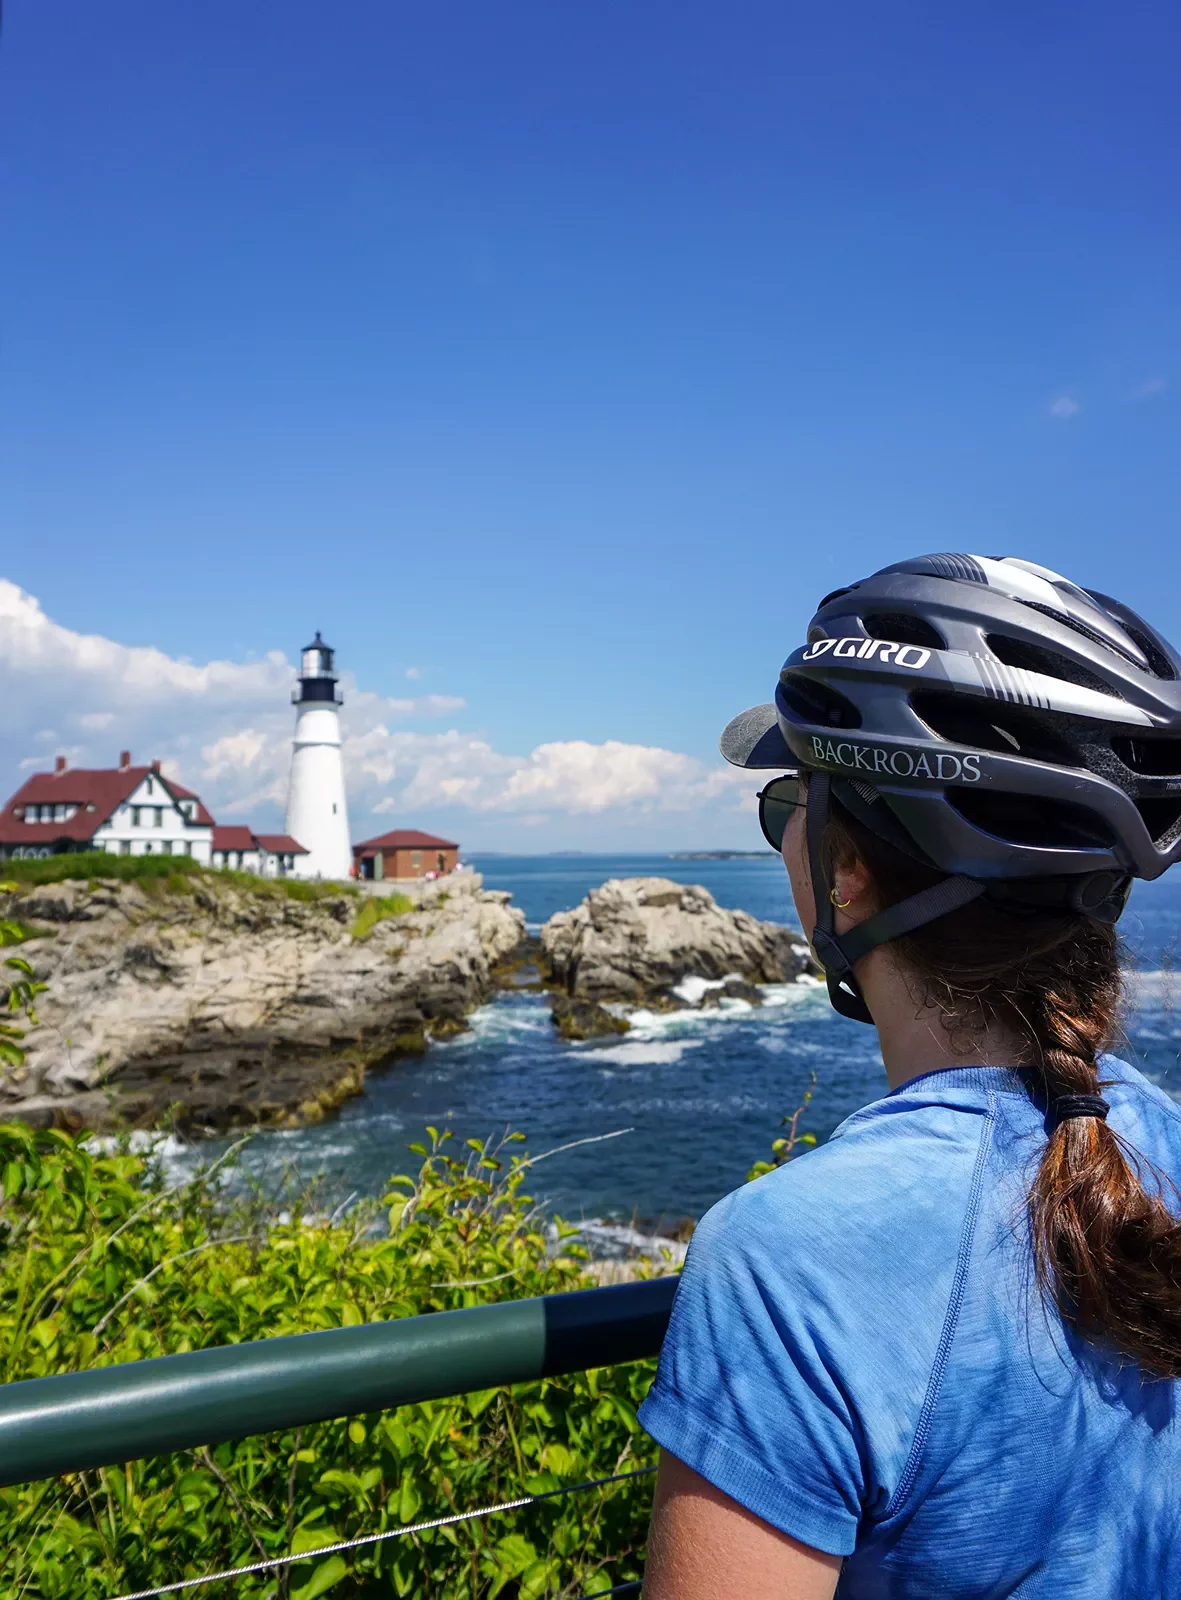 Caucasian woman in a bike helmet looks across a body of water at a lighthouse